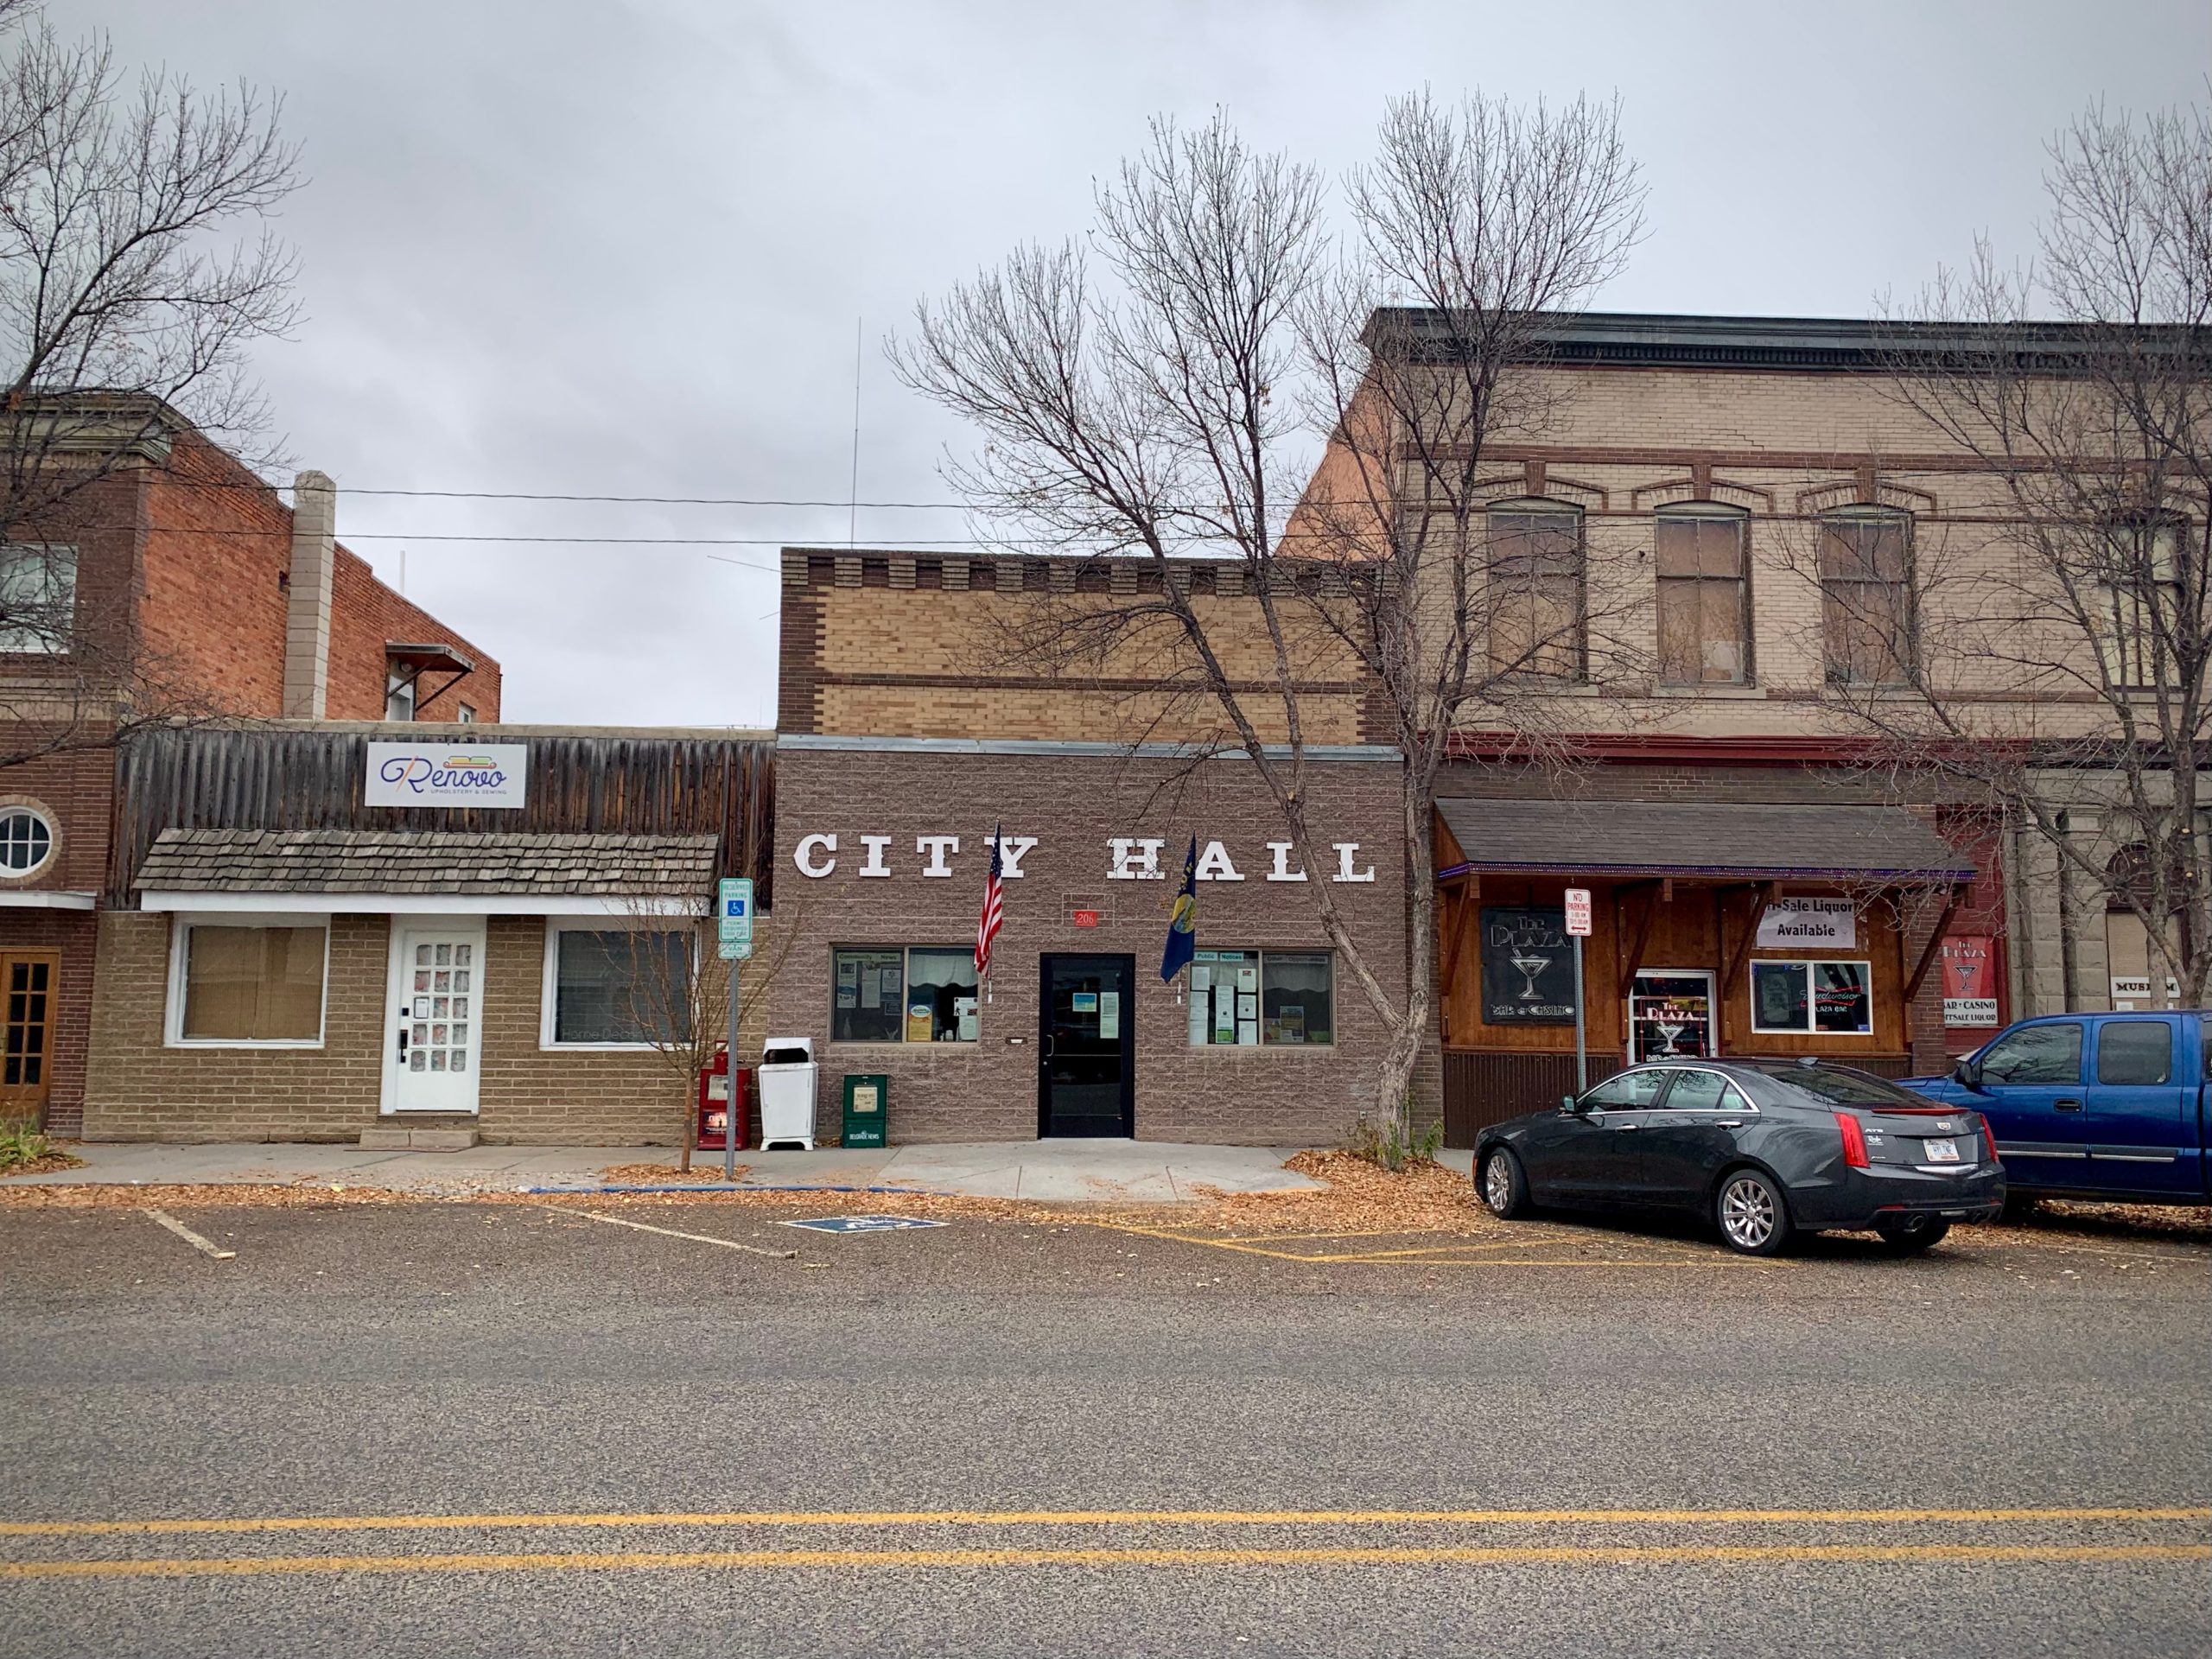 Photo of the City Hall in Three Forks, Montana. Cloudy fall day, cars are parked along street.